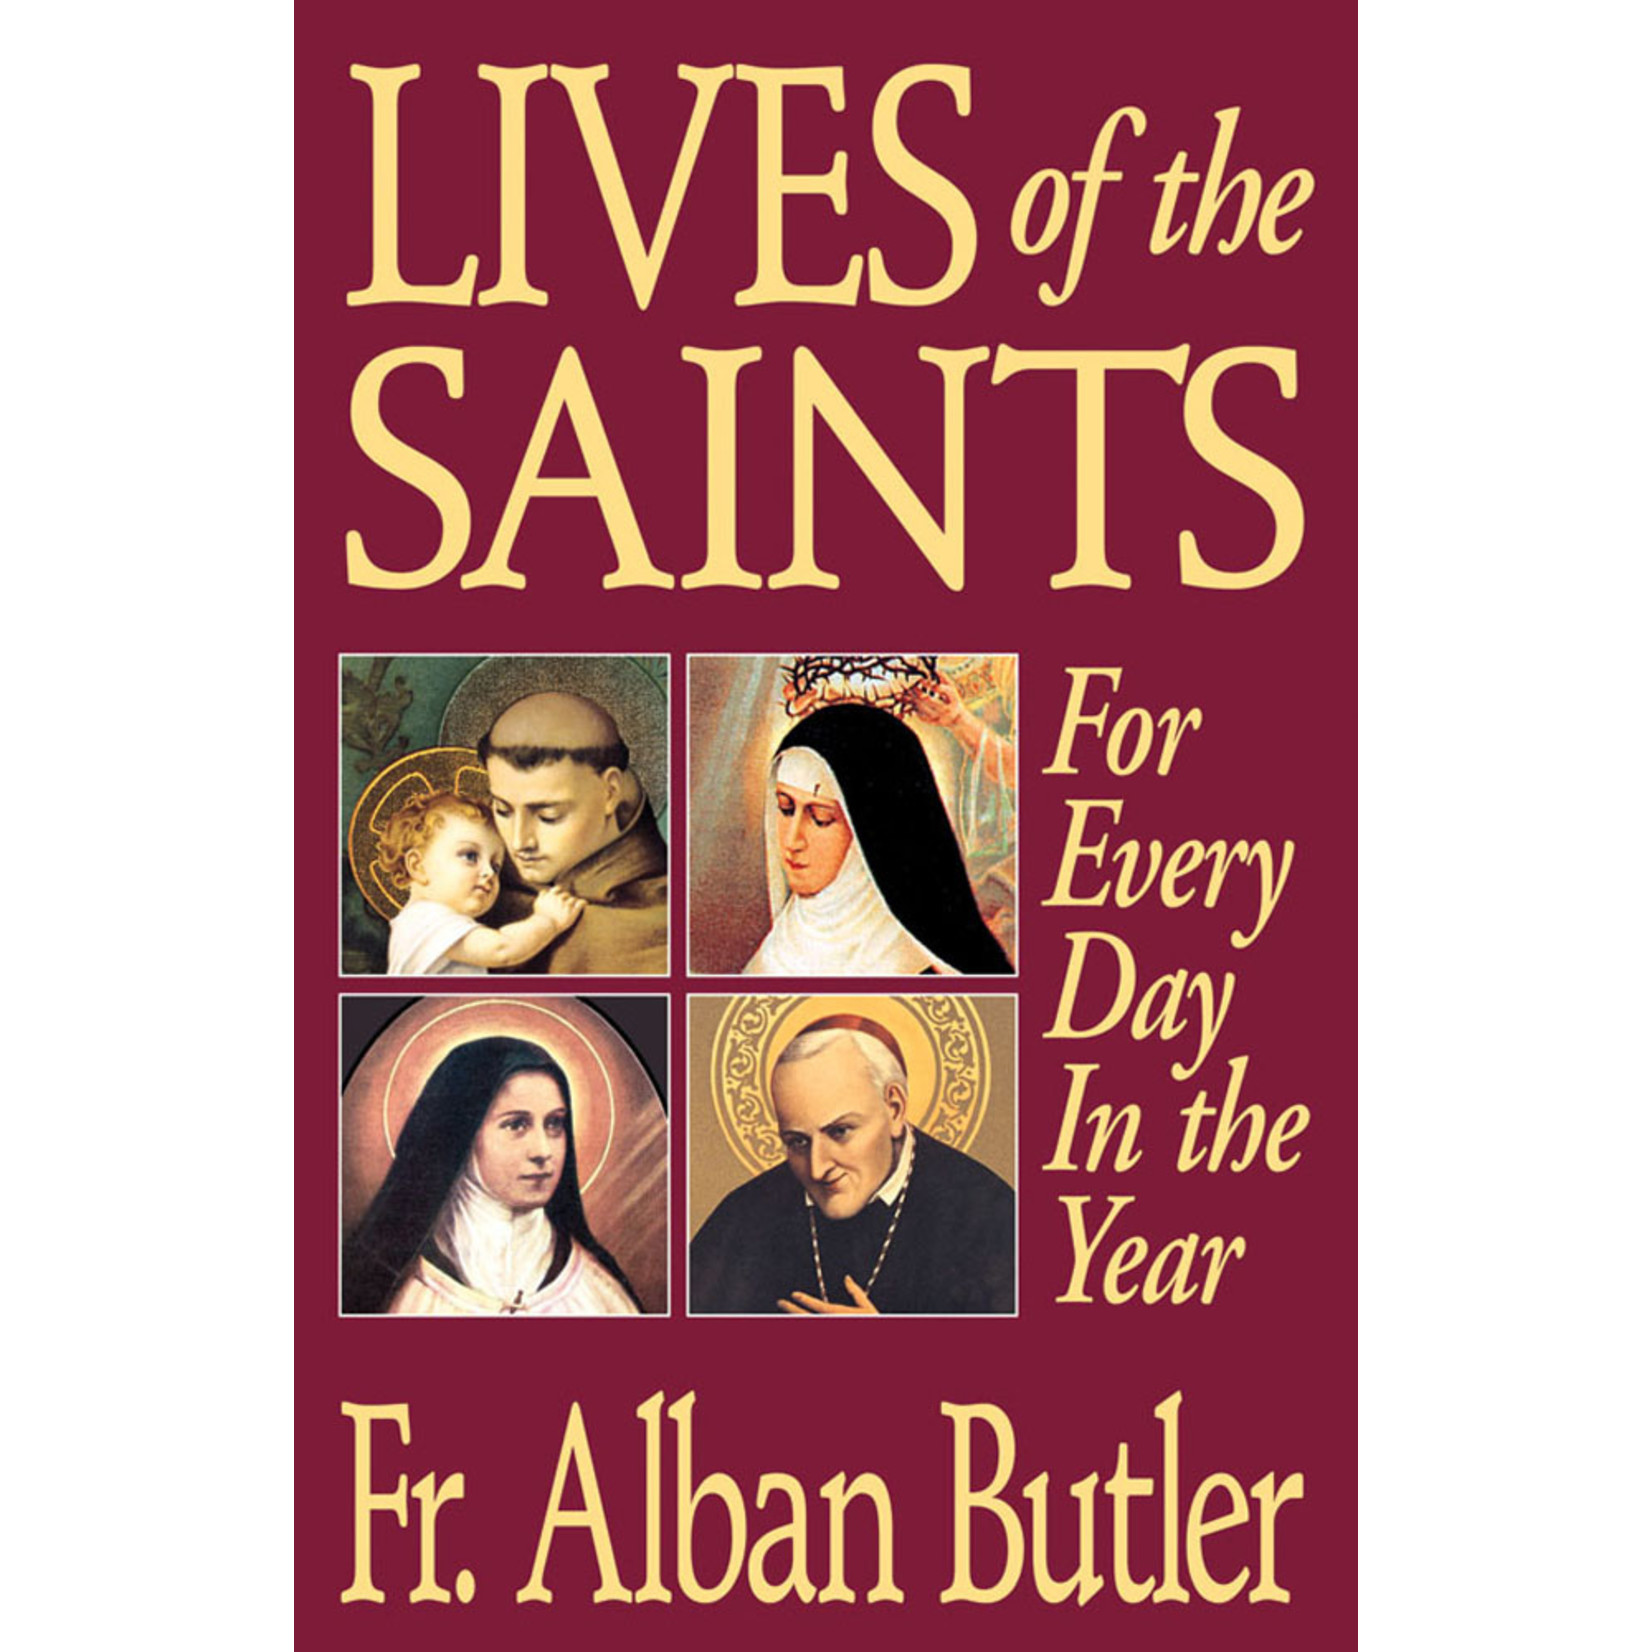 Lives of the Saints For Every Day in the Year